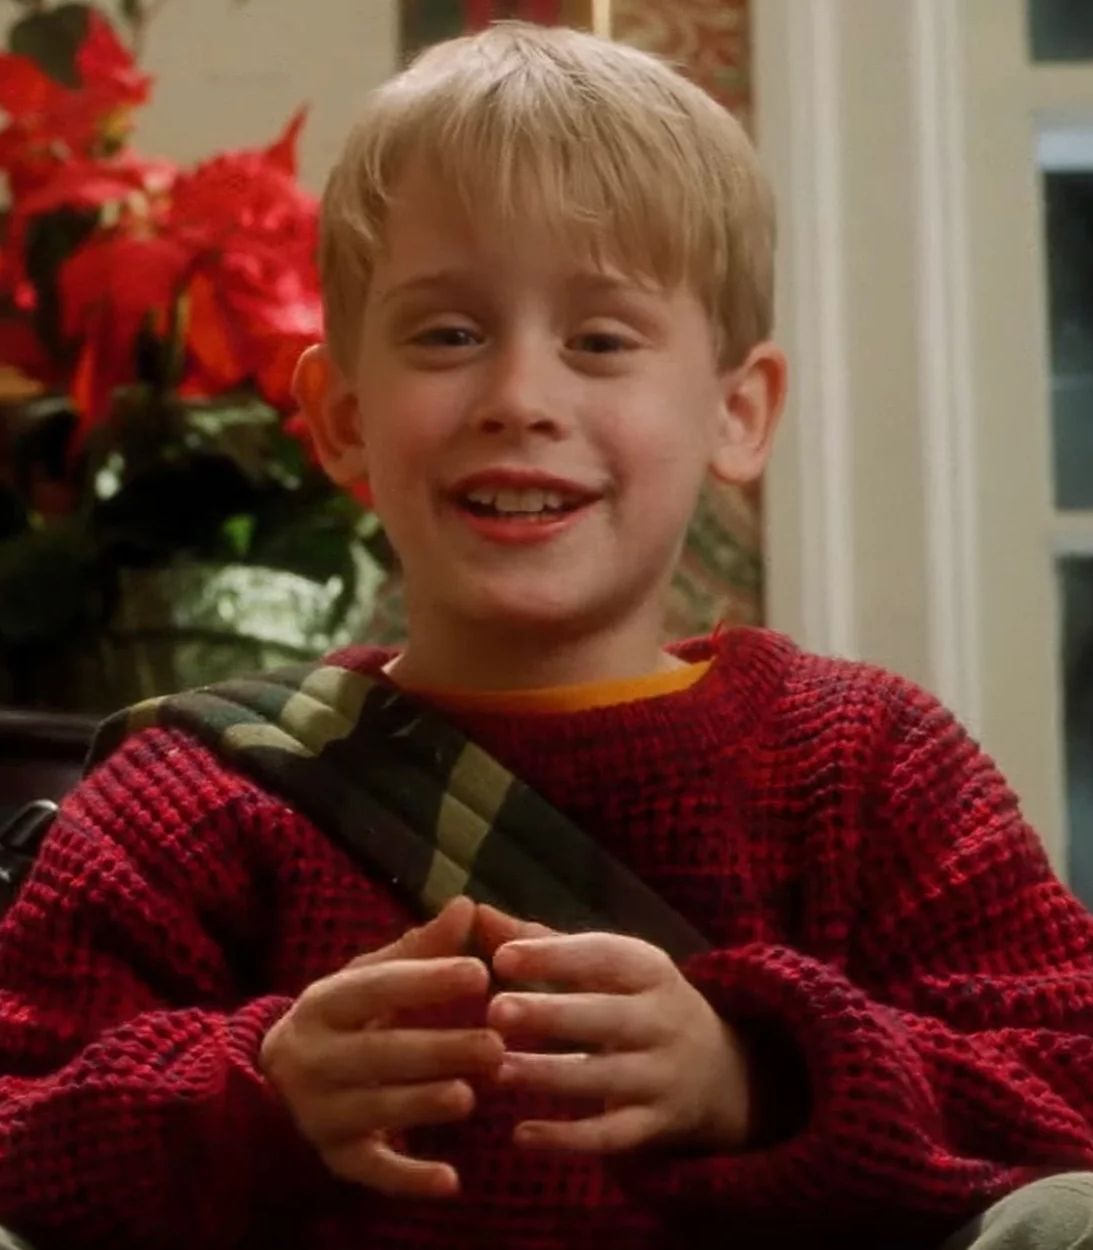 kevin home alone TLDR vertical